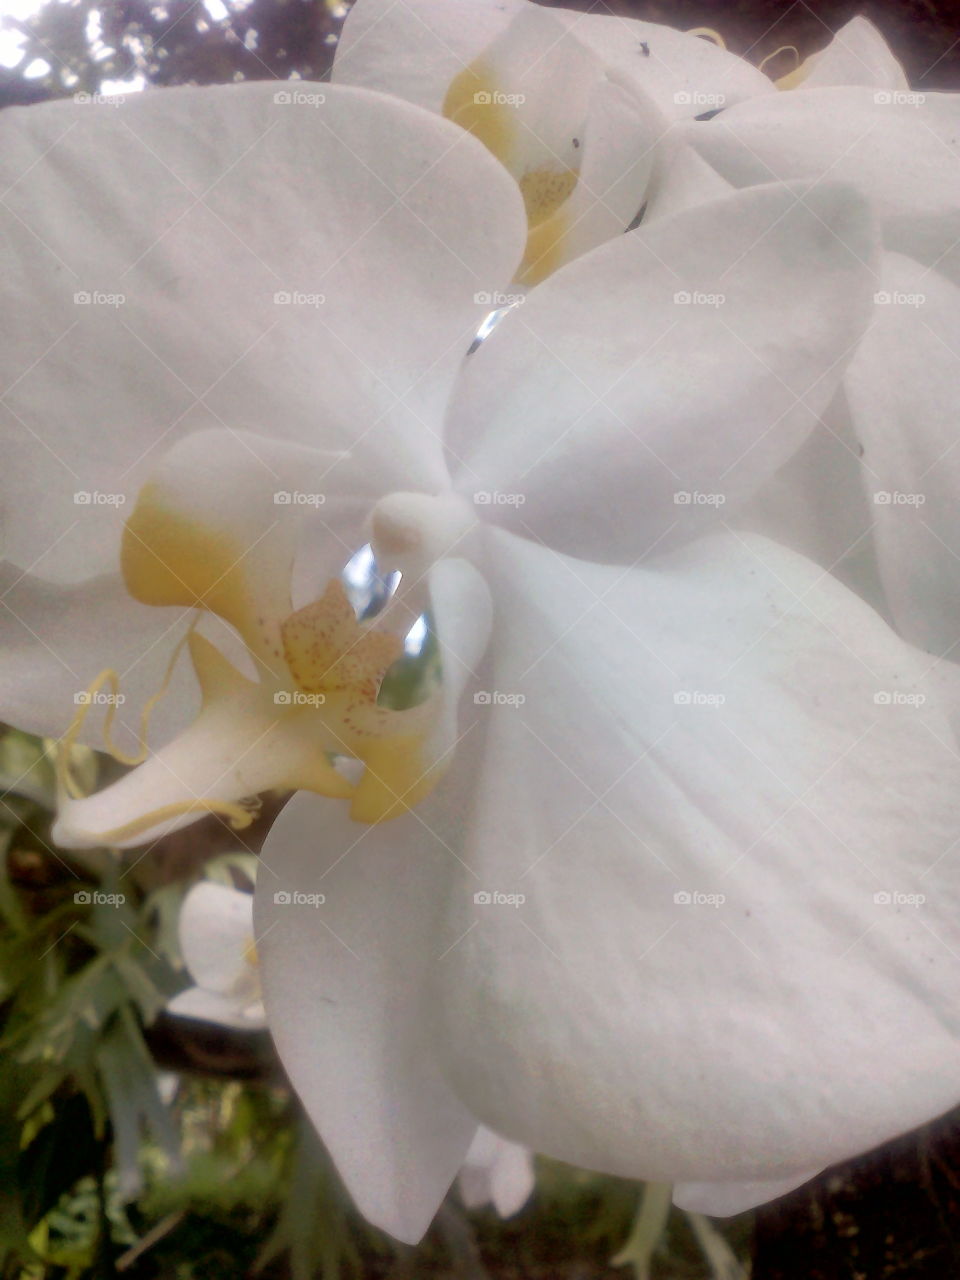 Orchid flower!!
it is very white